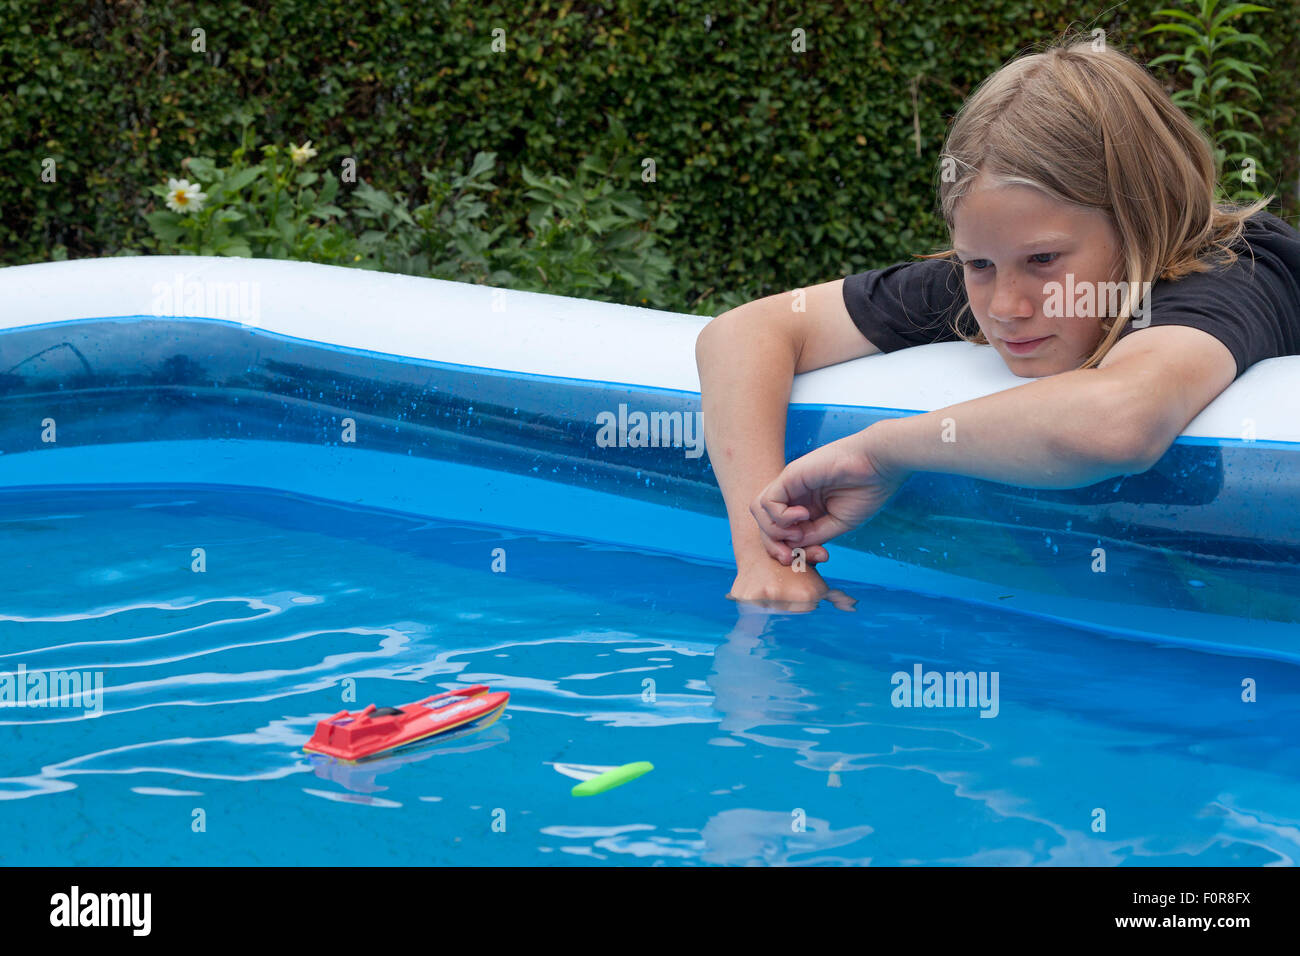 young boy playing with toy boats Stock Photo